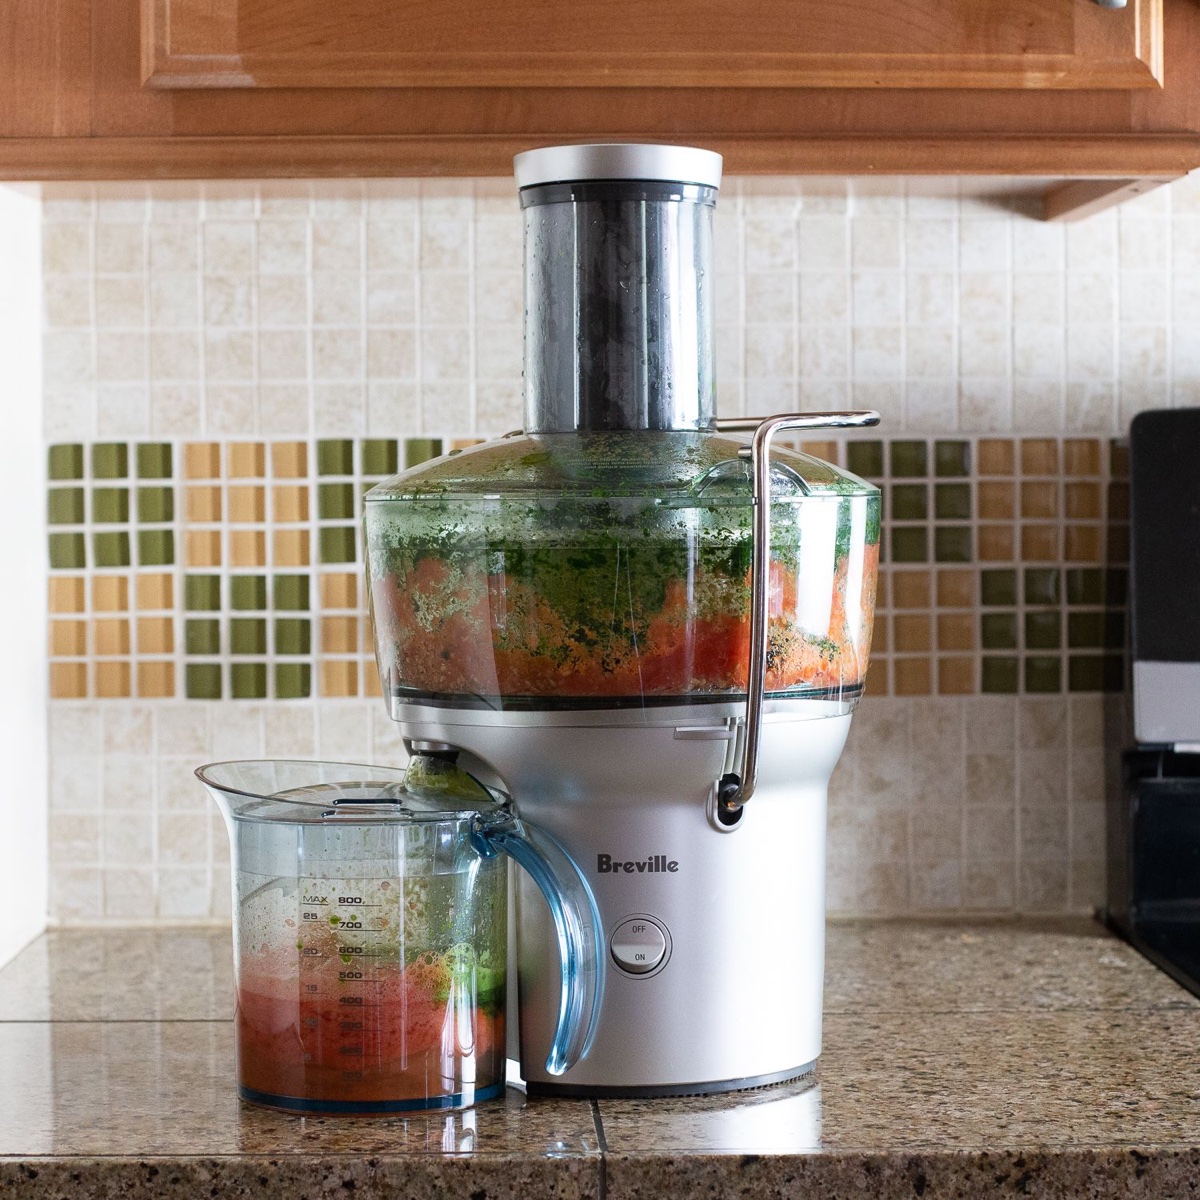 How To Use A Breville Juicer